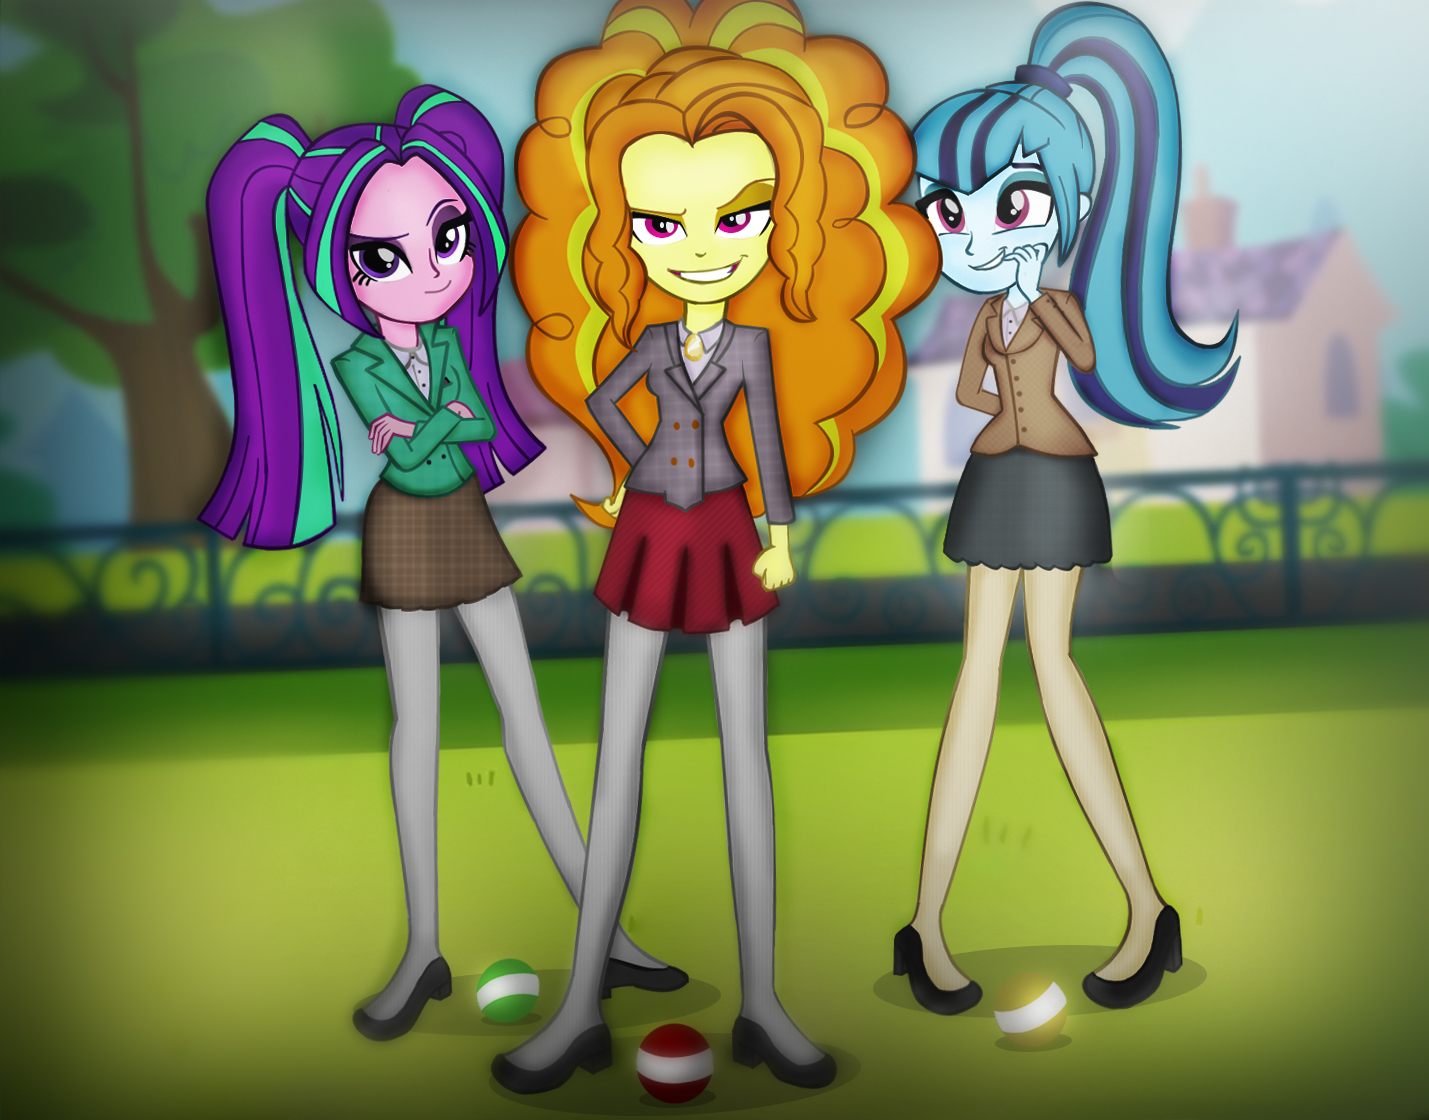 equestria_girls___heathers_by_invisiblei